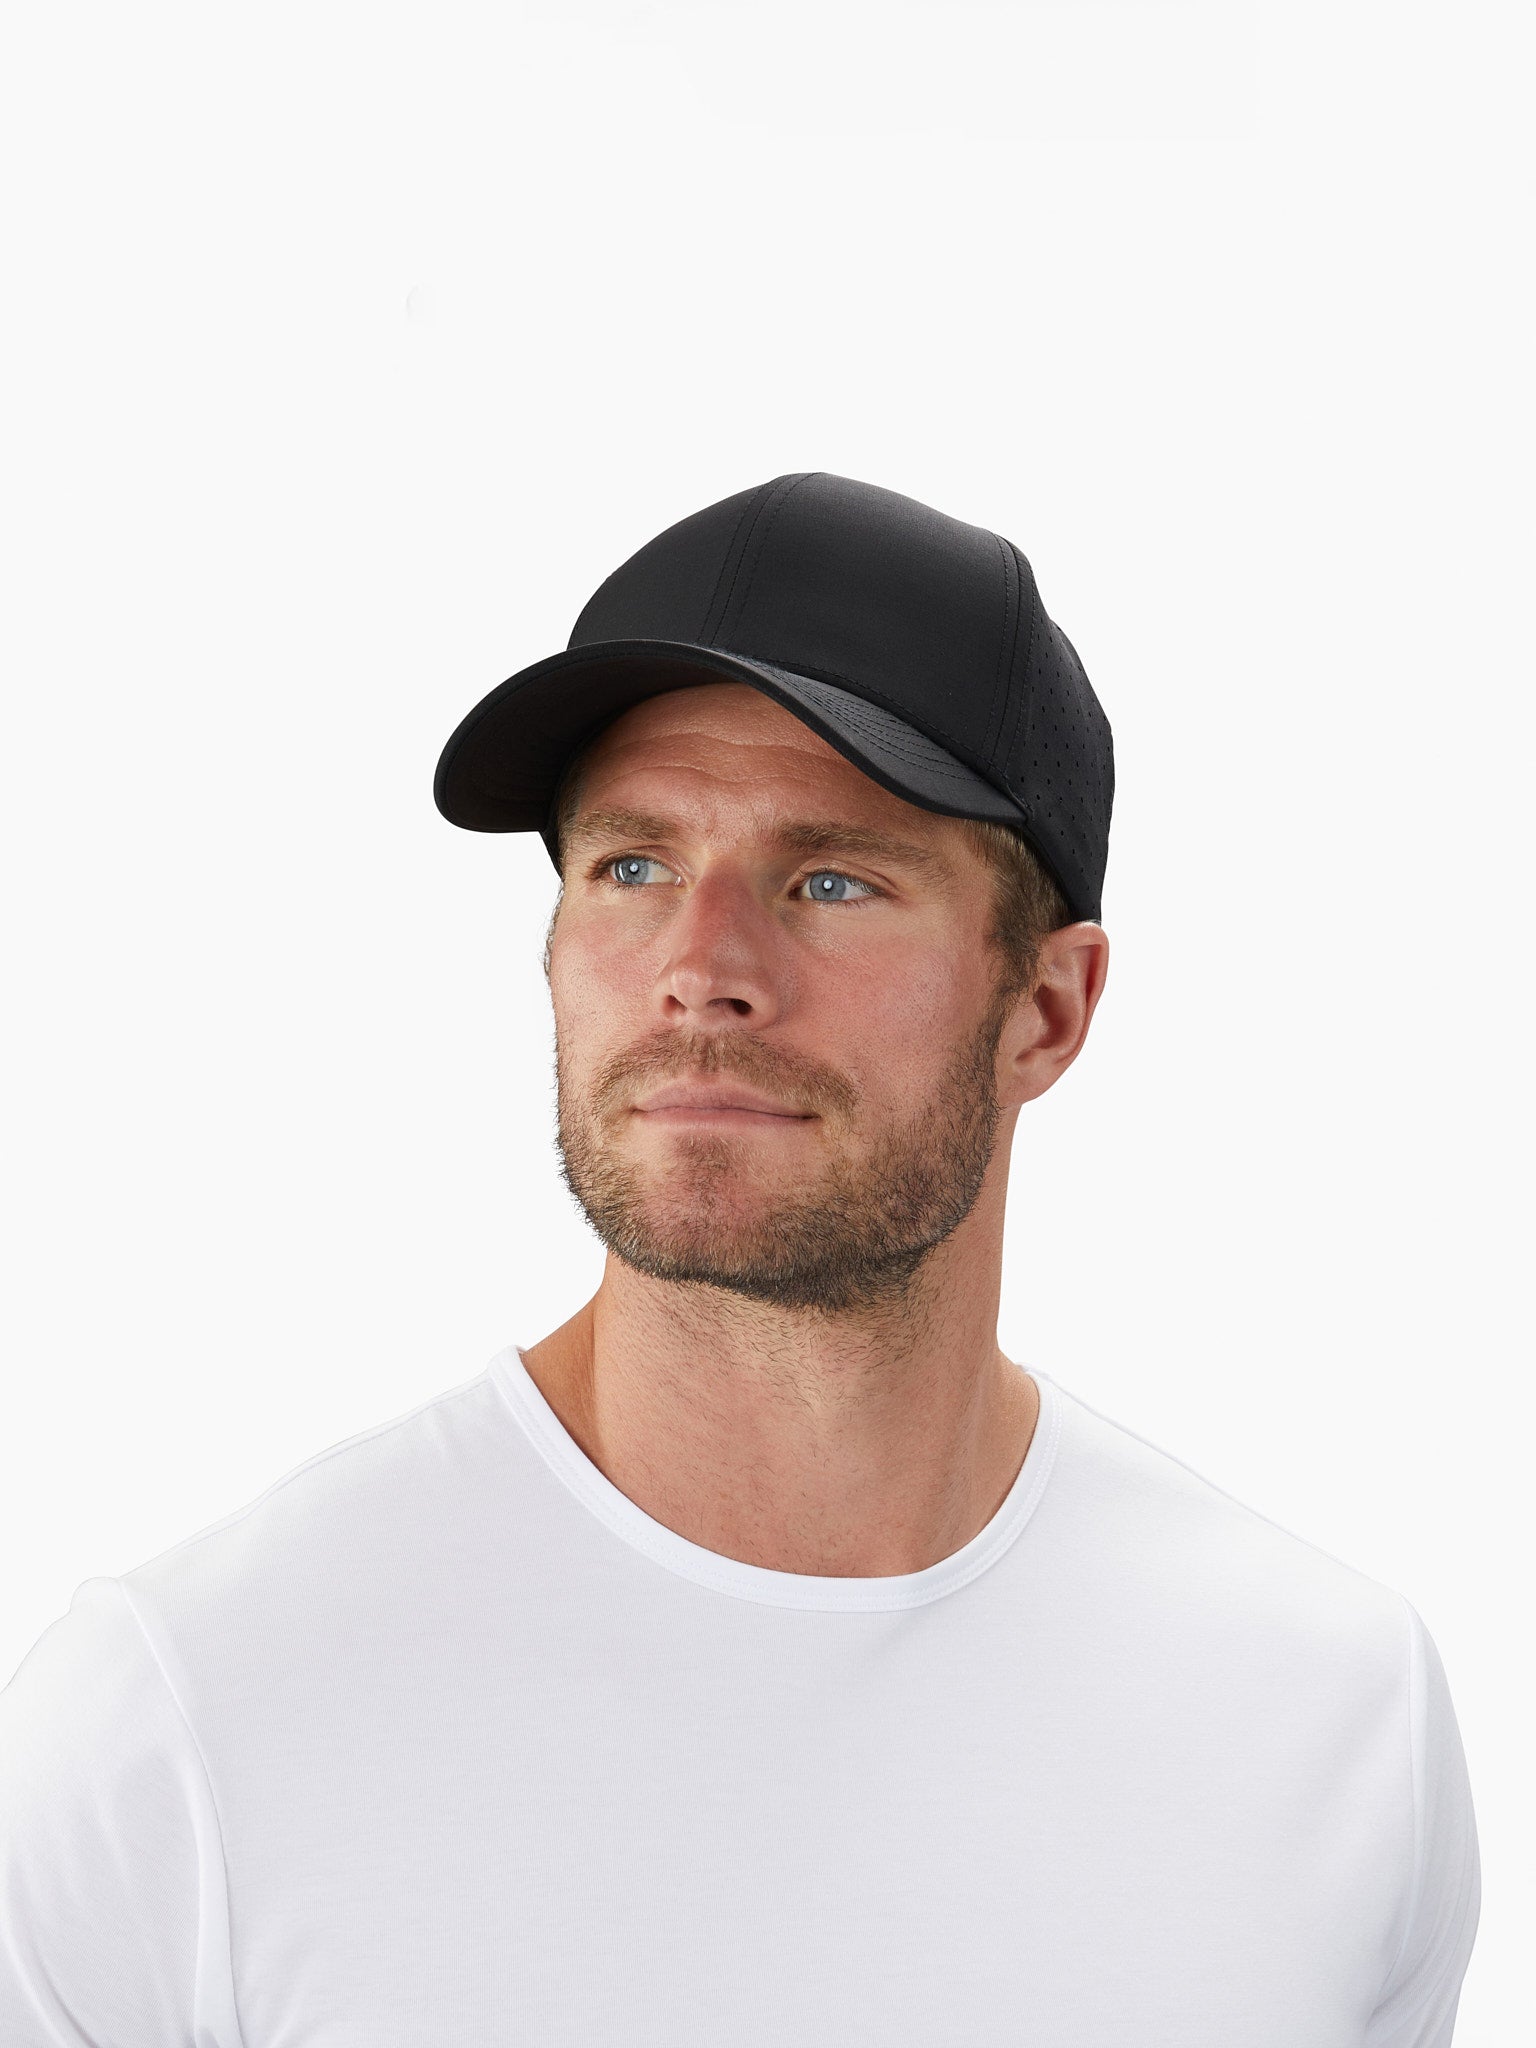 AO Perf Hat | Black - $20.00 | The CUTS Marketplace